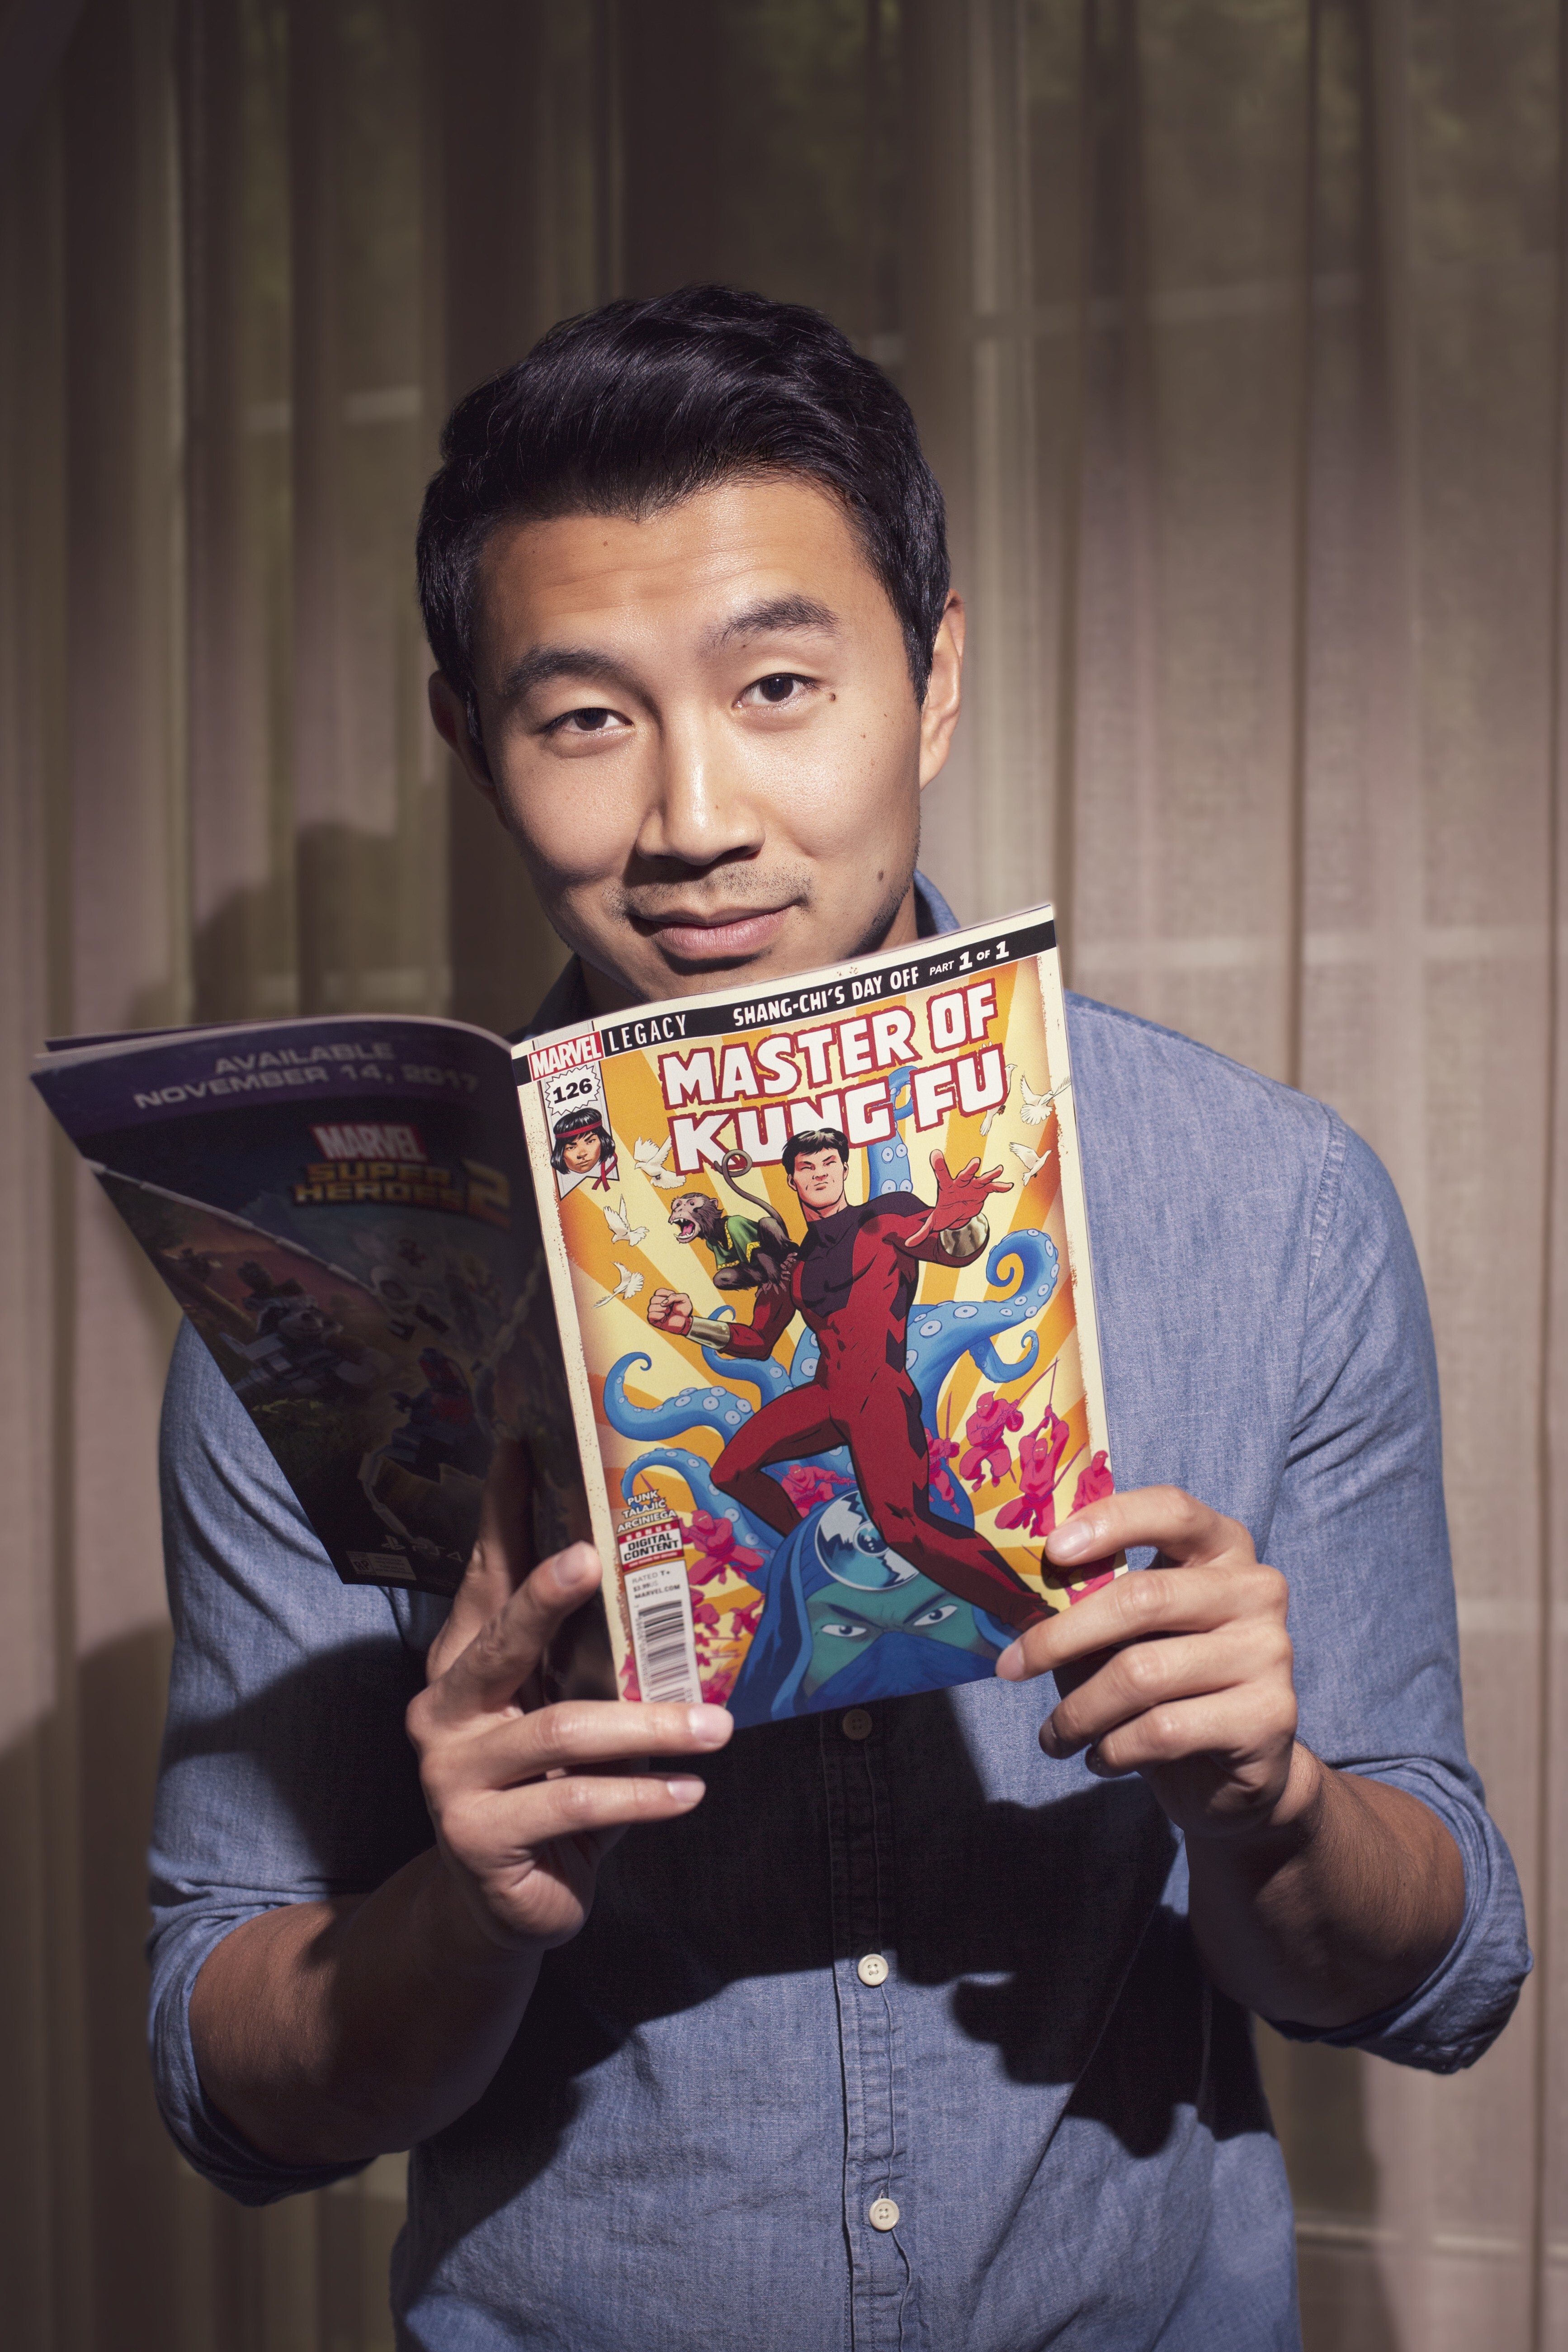 Simu Liu is First Asian Star to Lead Superhero Franchise - Colorlines